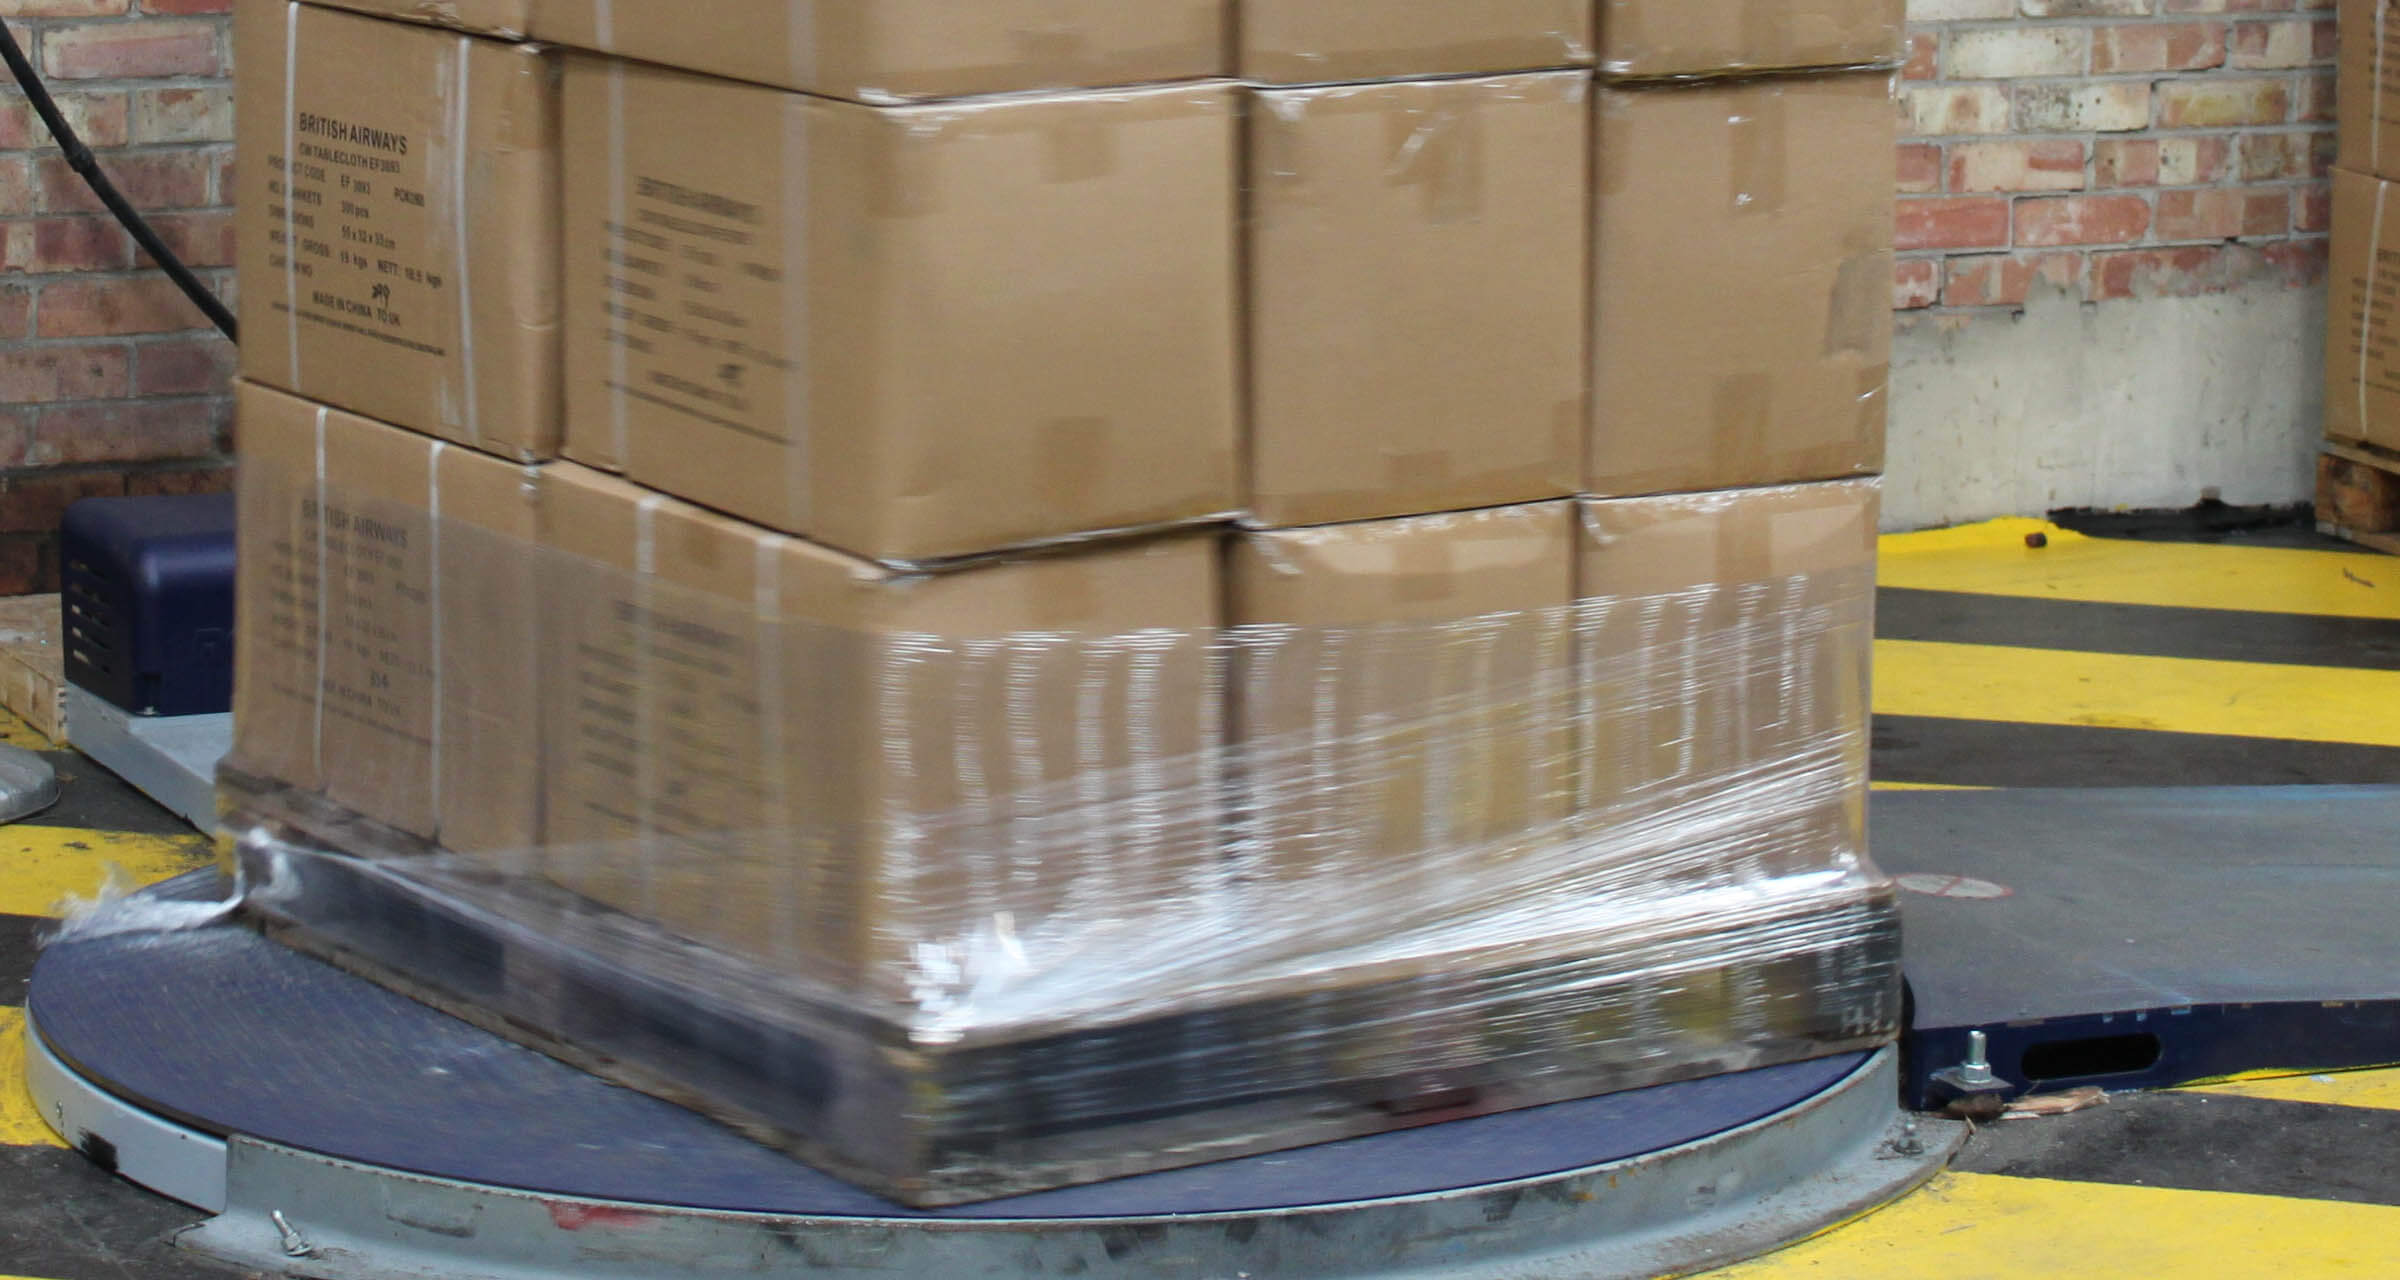 Pallet wrapping innovations reduce plastic use